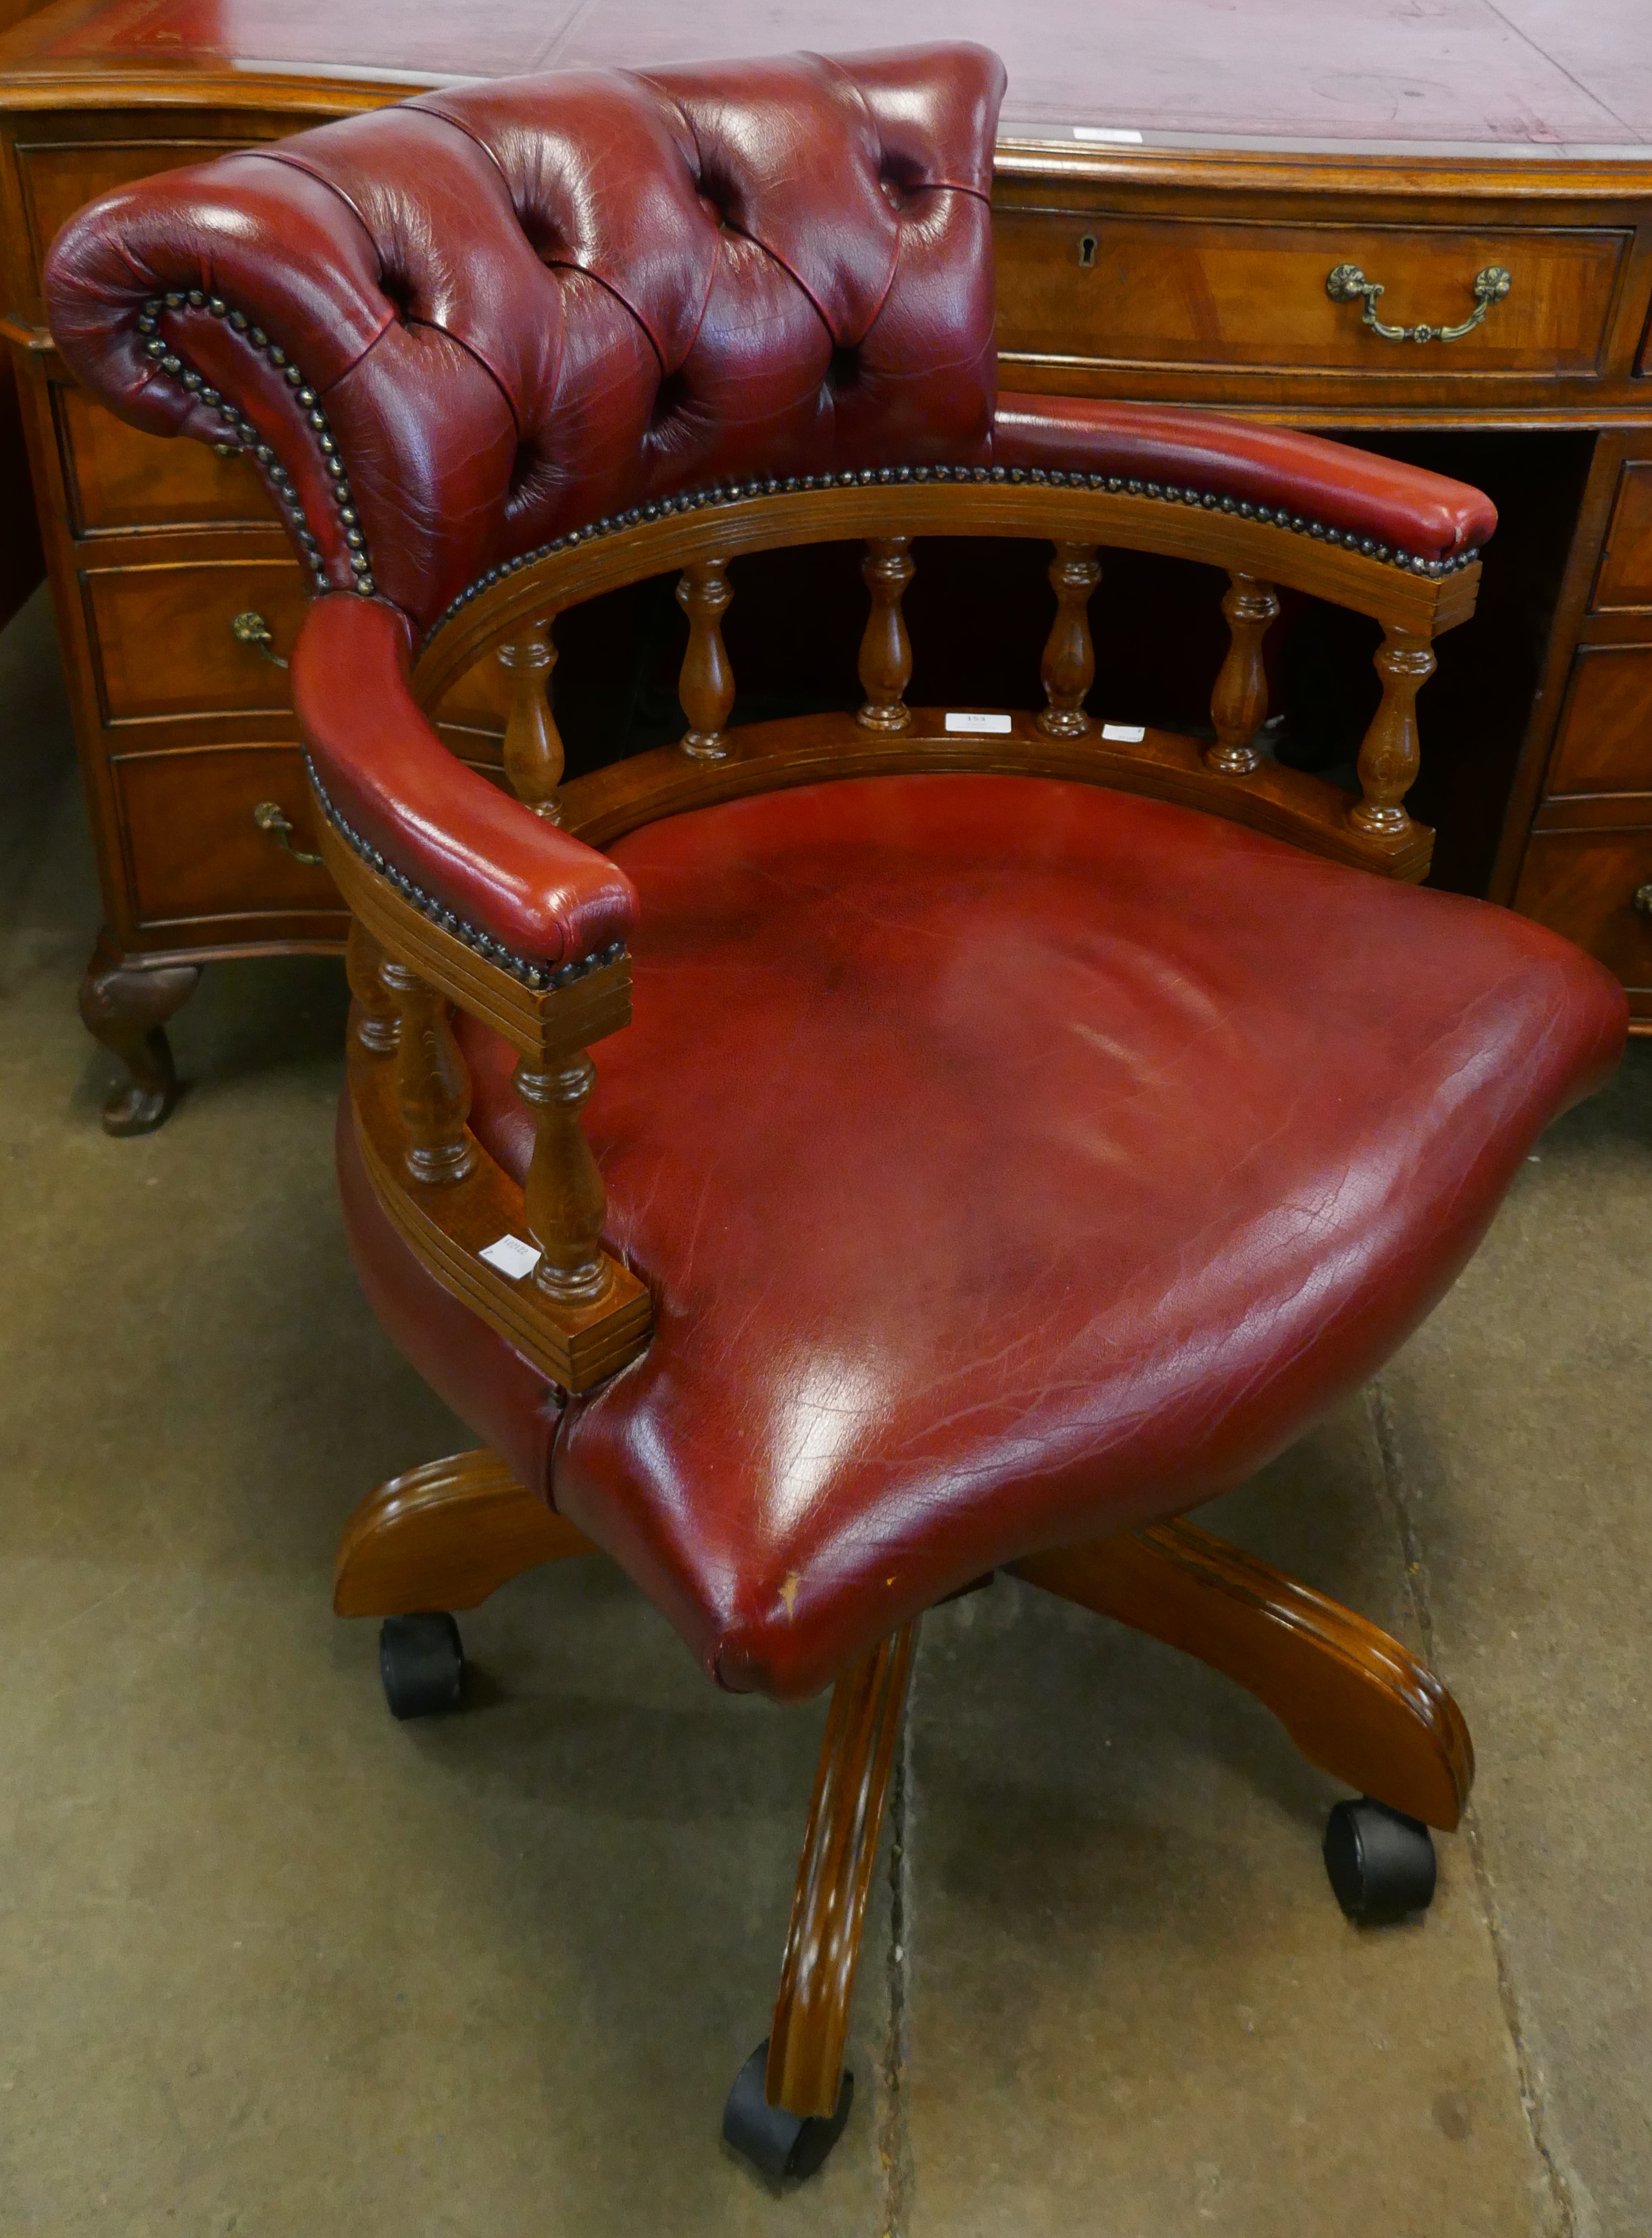 A mahogany and red leather revolving Captain's desk chair